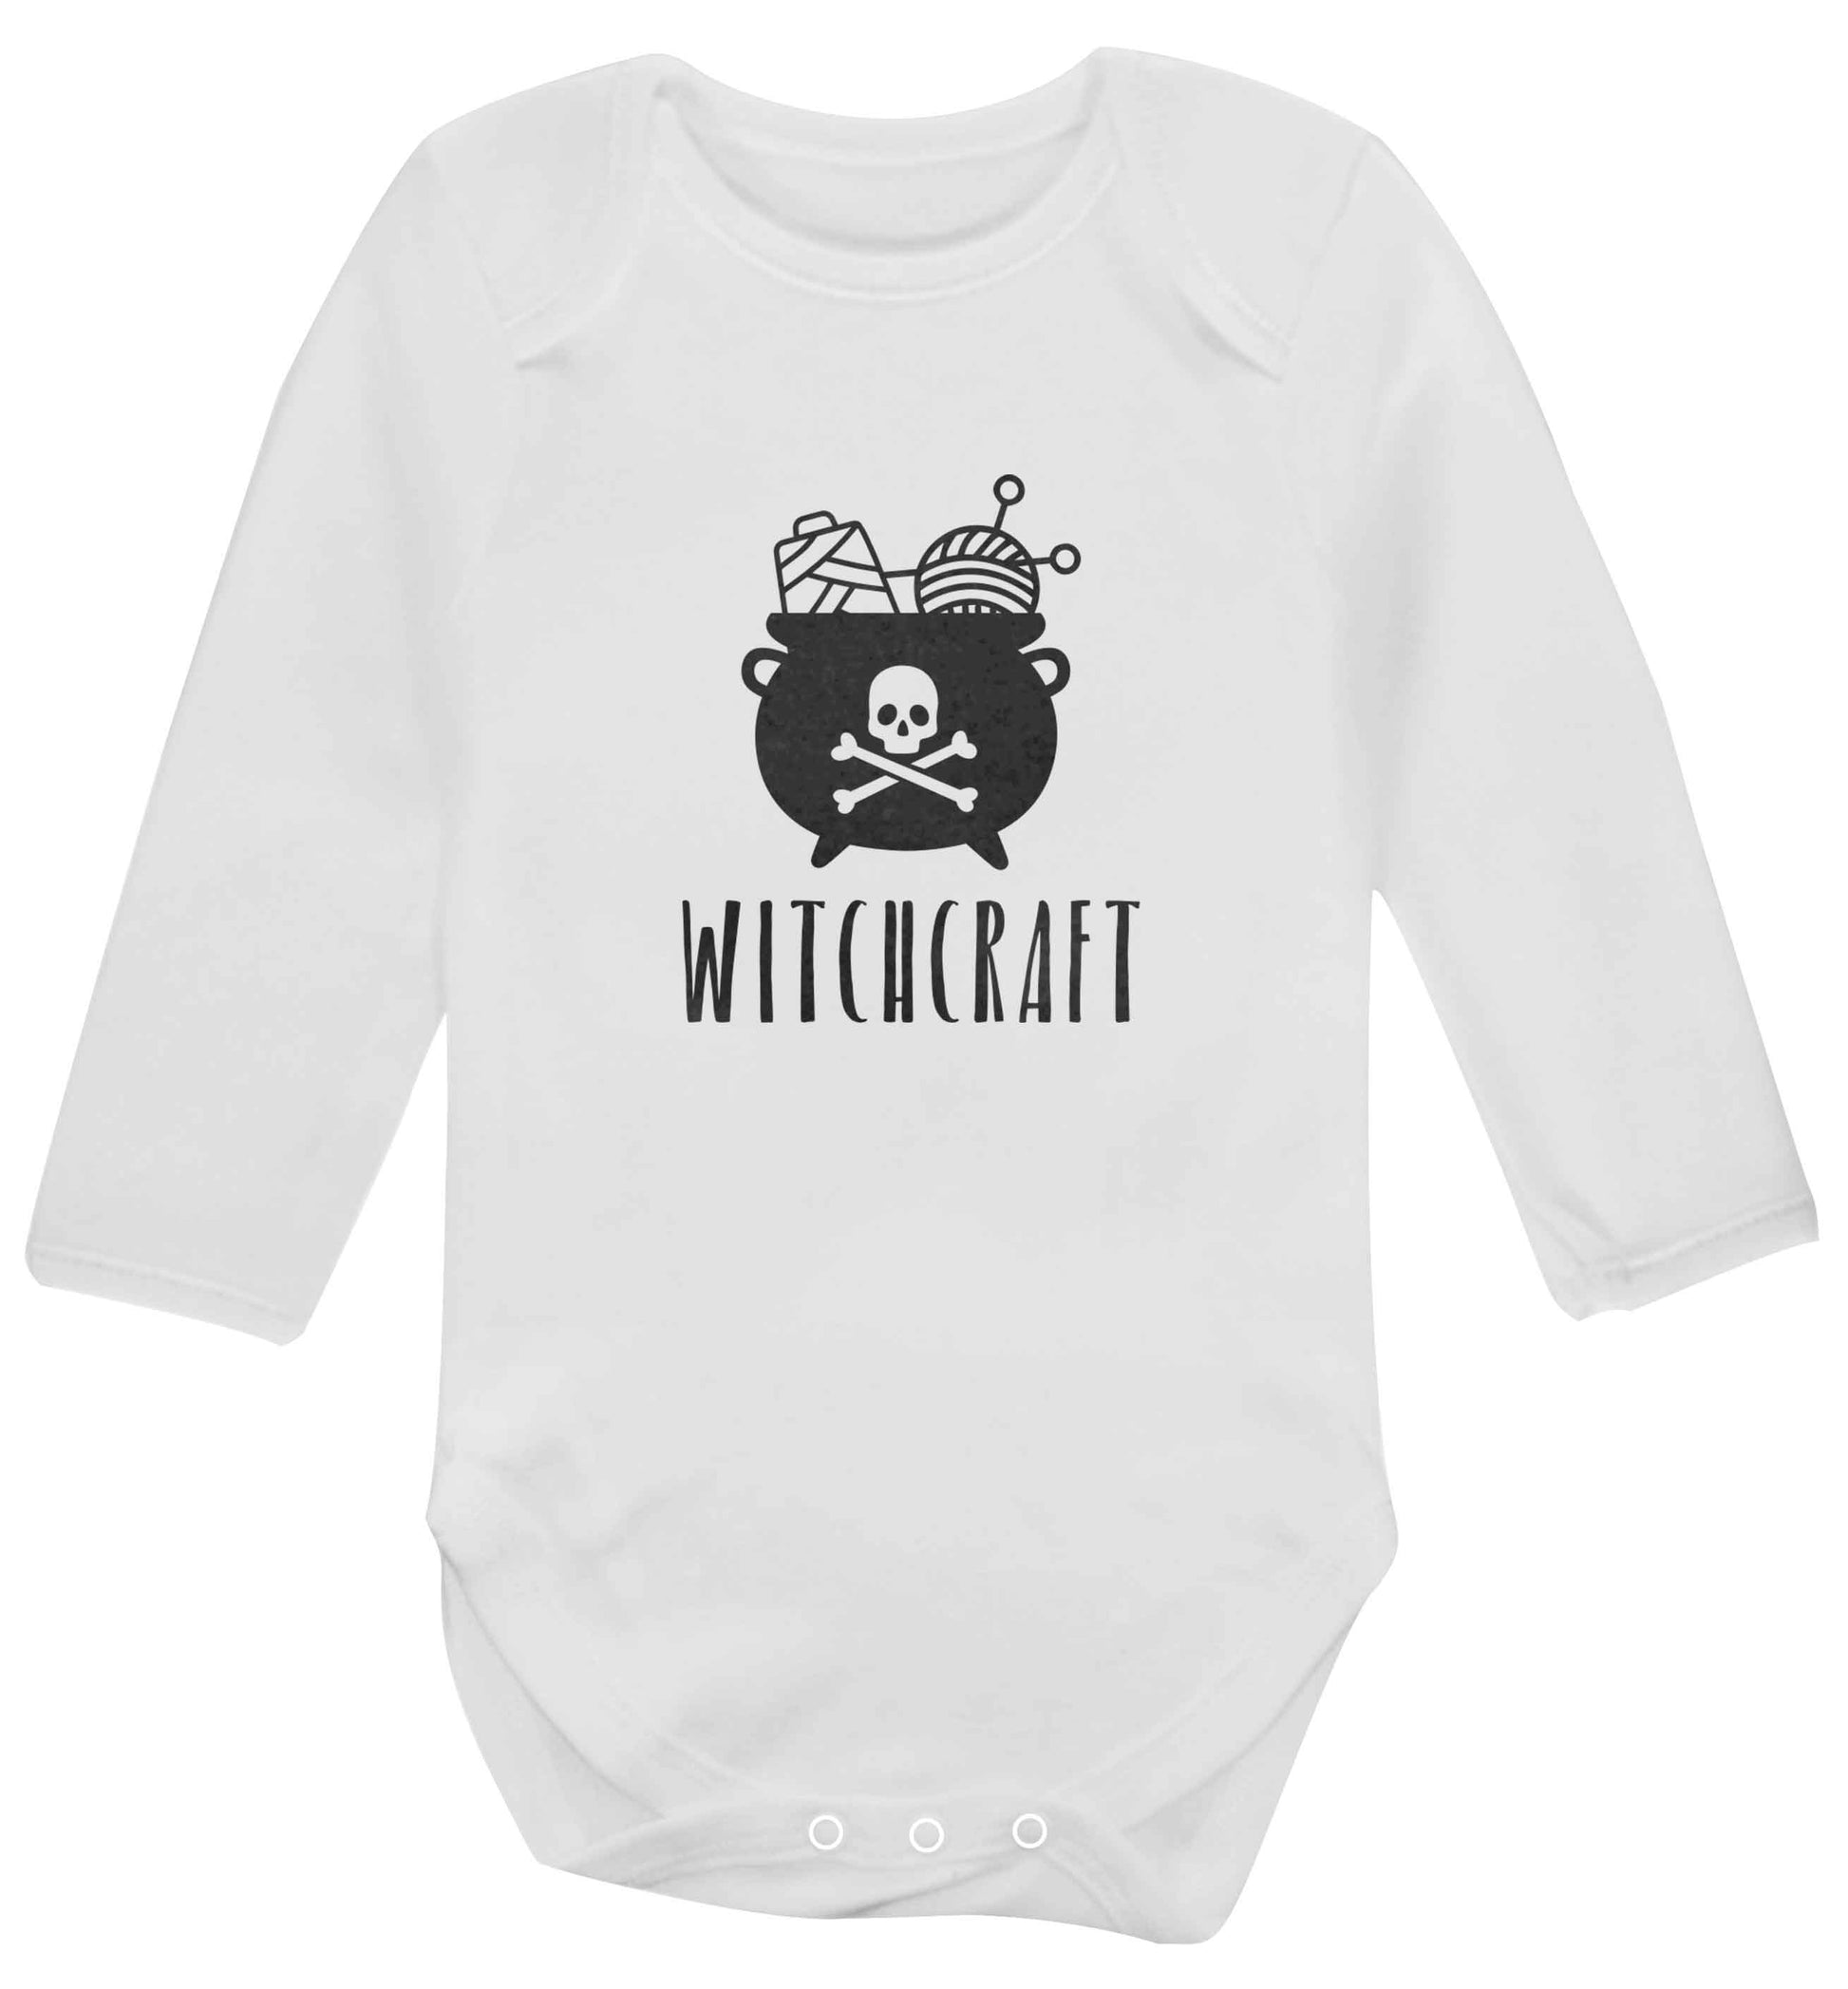 Witchcraft baby vest long sleeved white 6-12 months